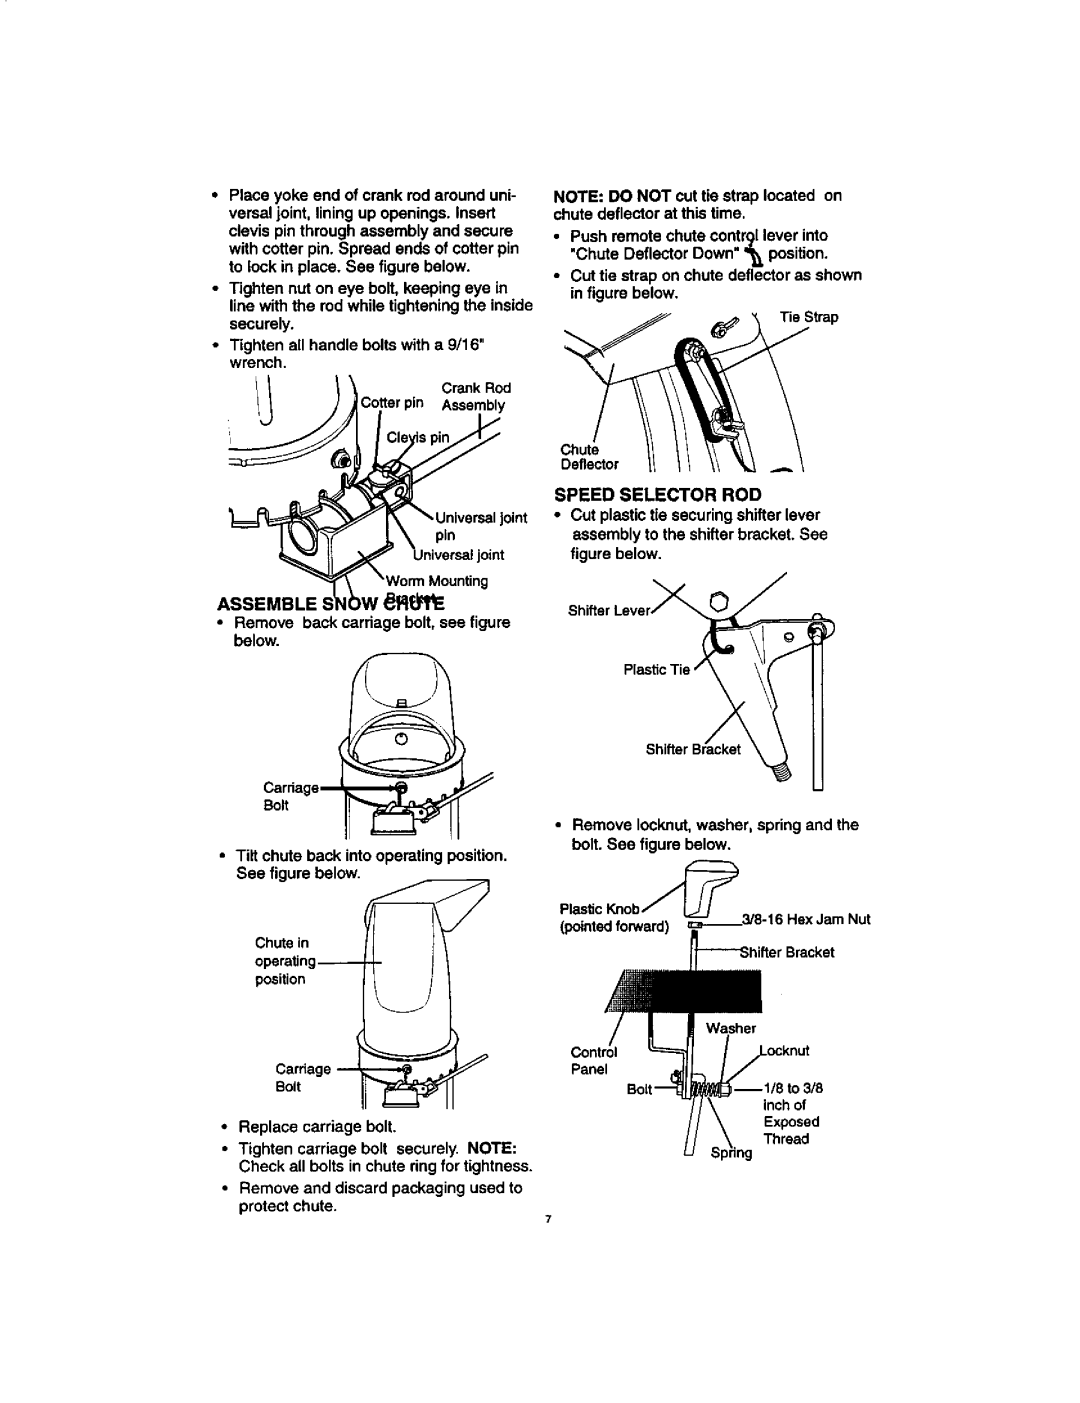 Craftsman 536.88123 operating instructions Tighten all handle bolts with a 9/16 wrench 